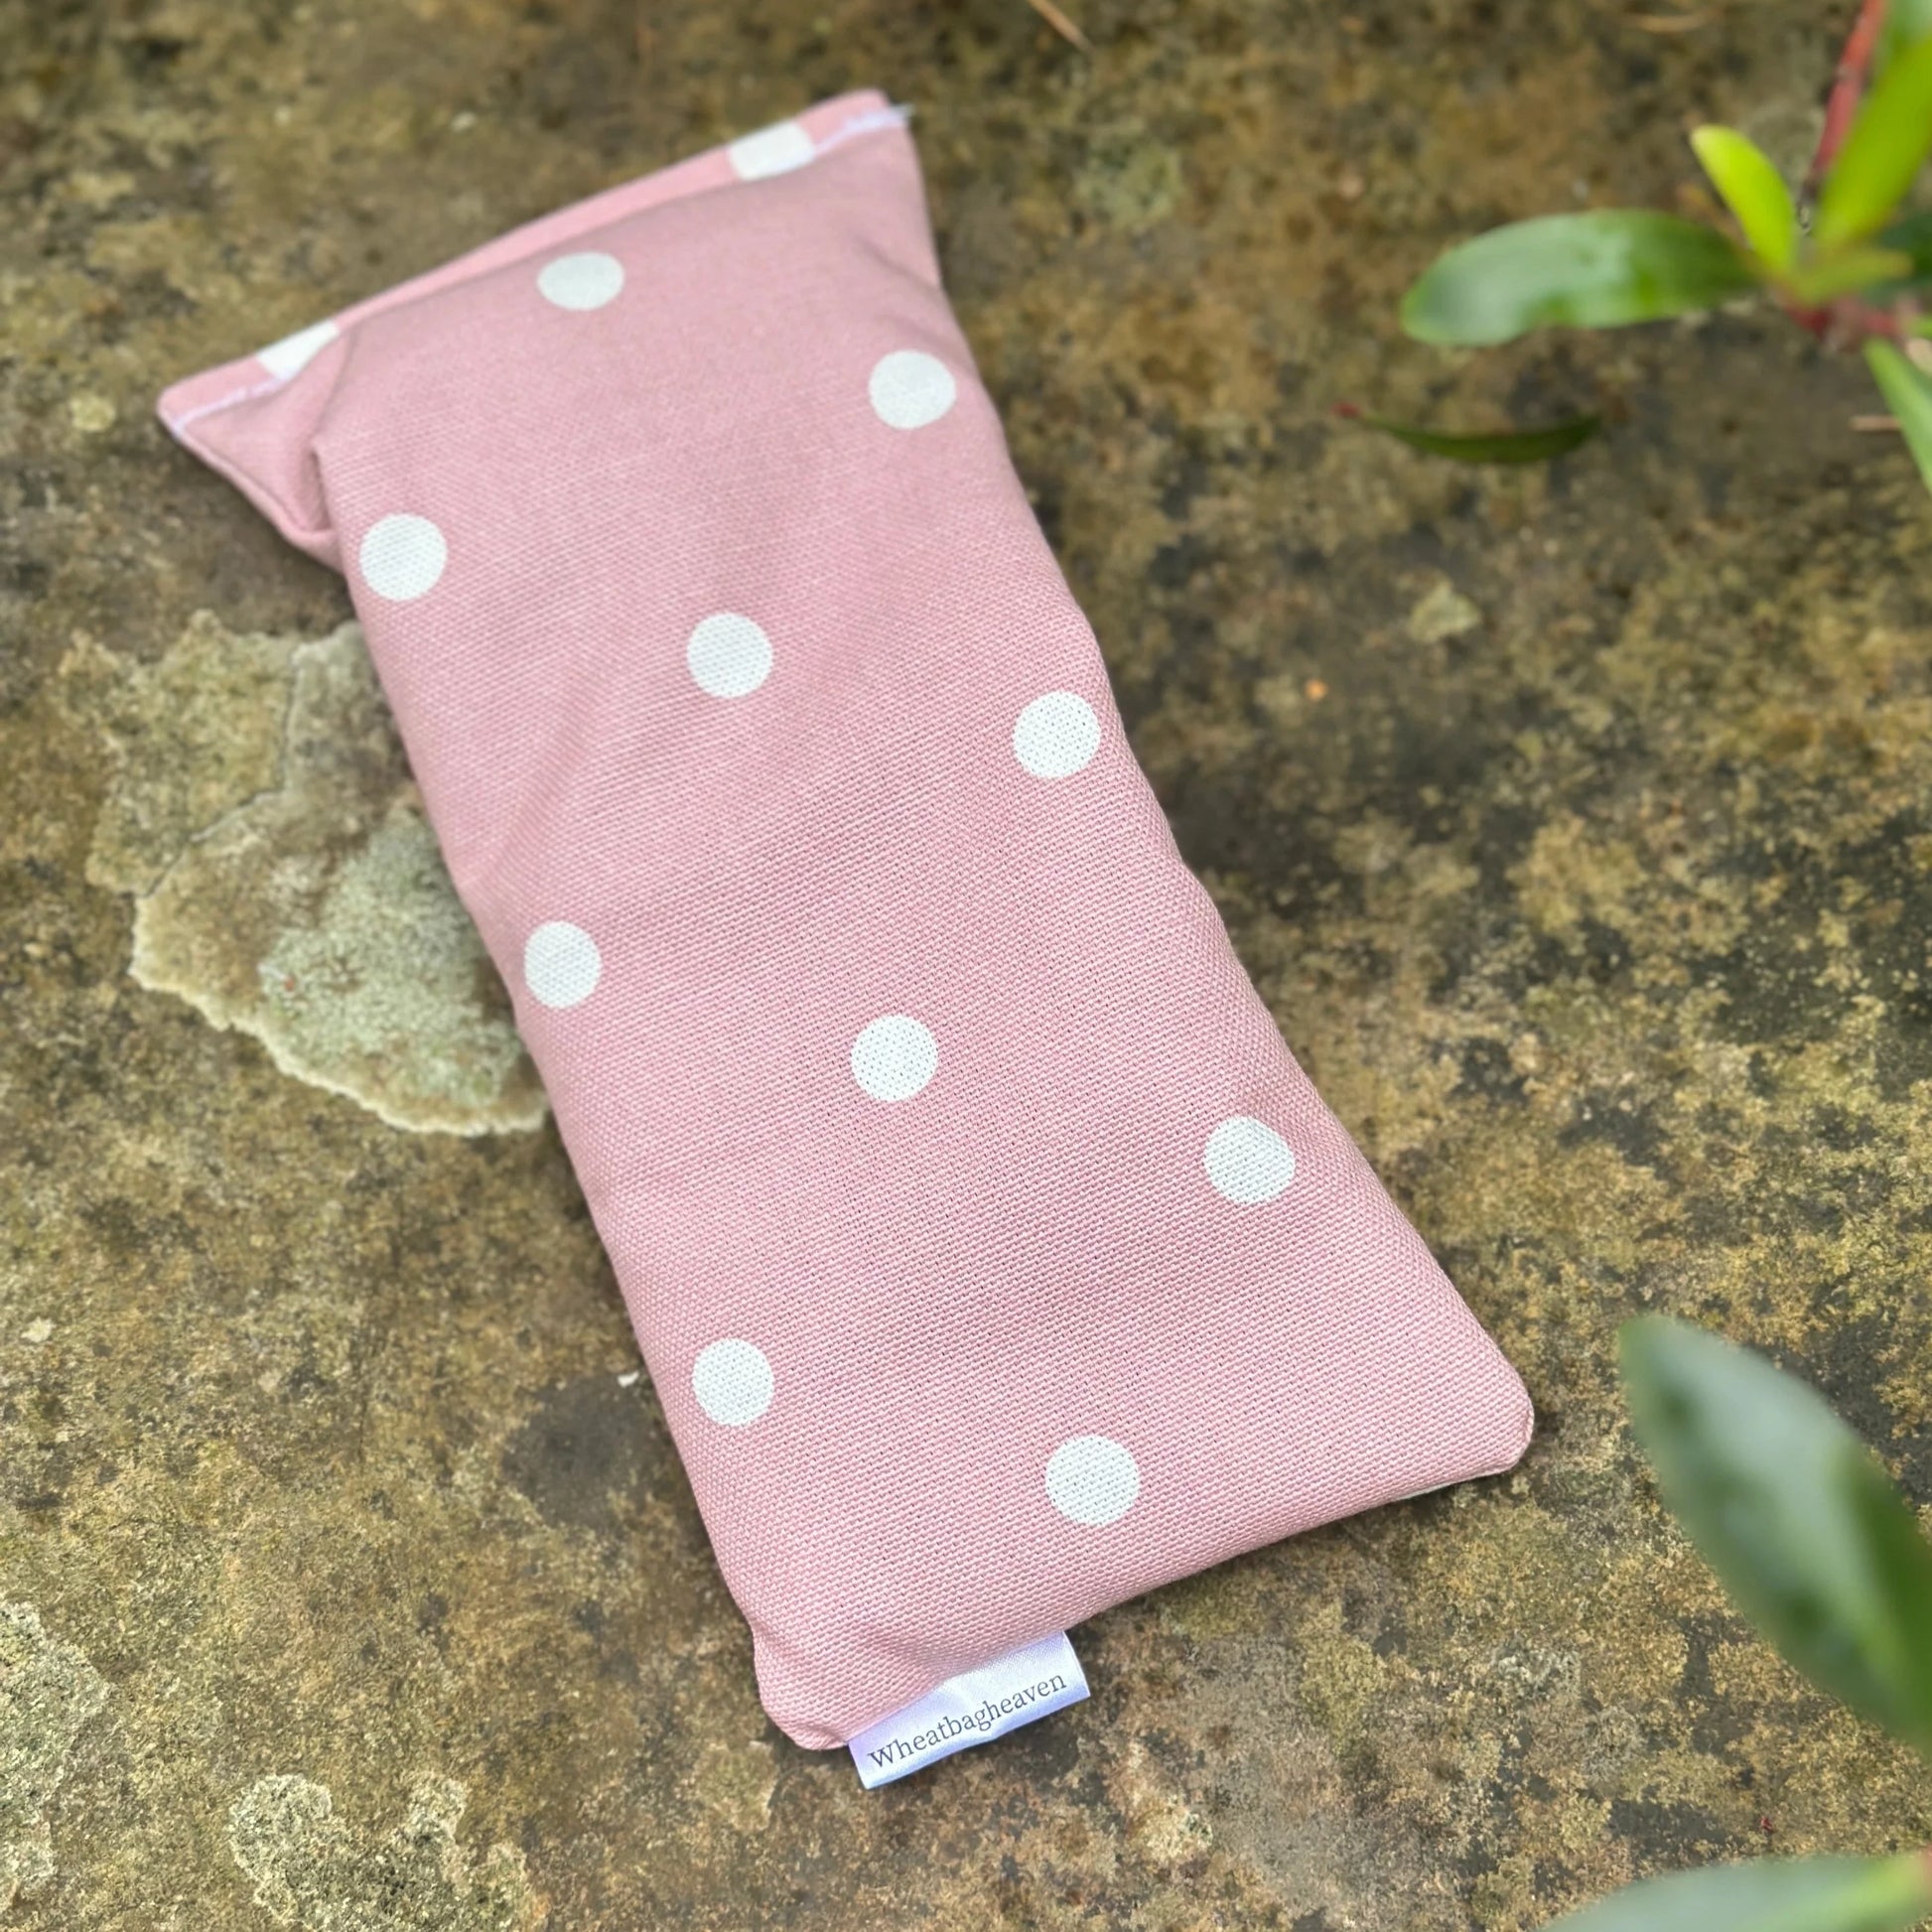 Pink dotty lavender scented eye pillow for yoga meditation, calm and rest from wheat bag heaven